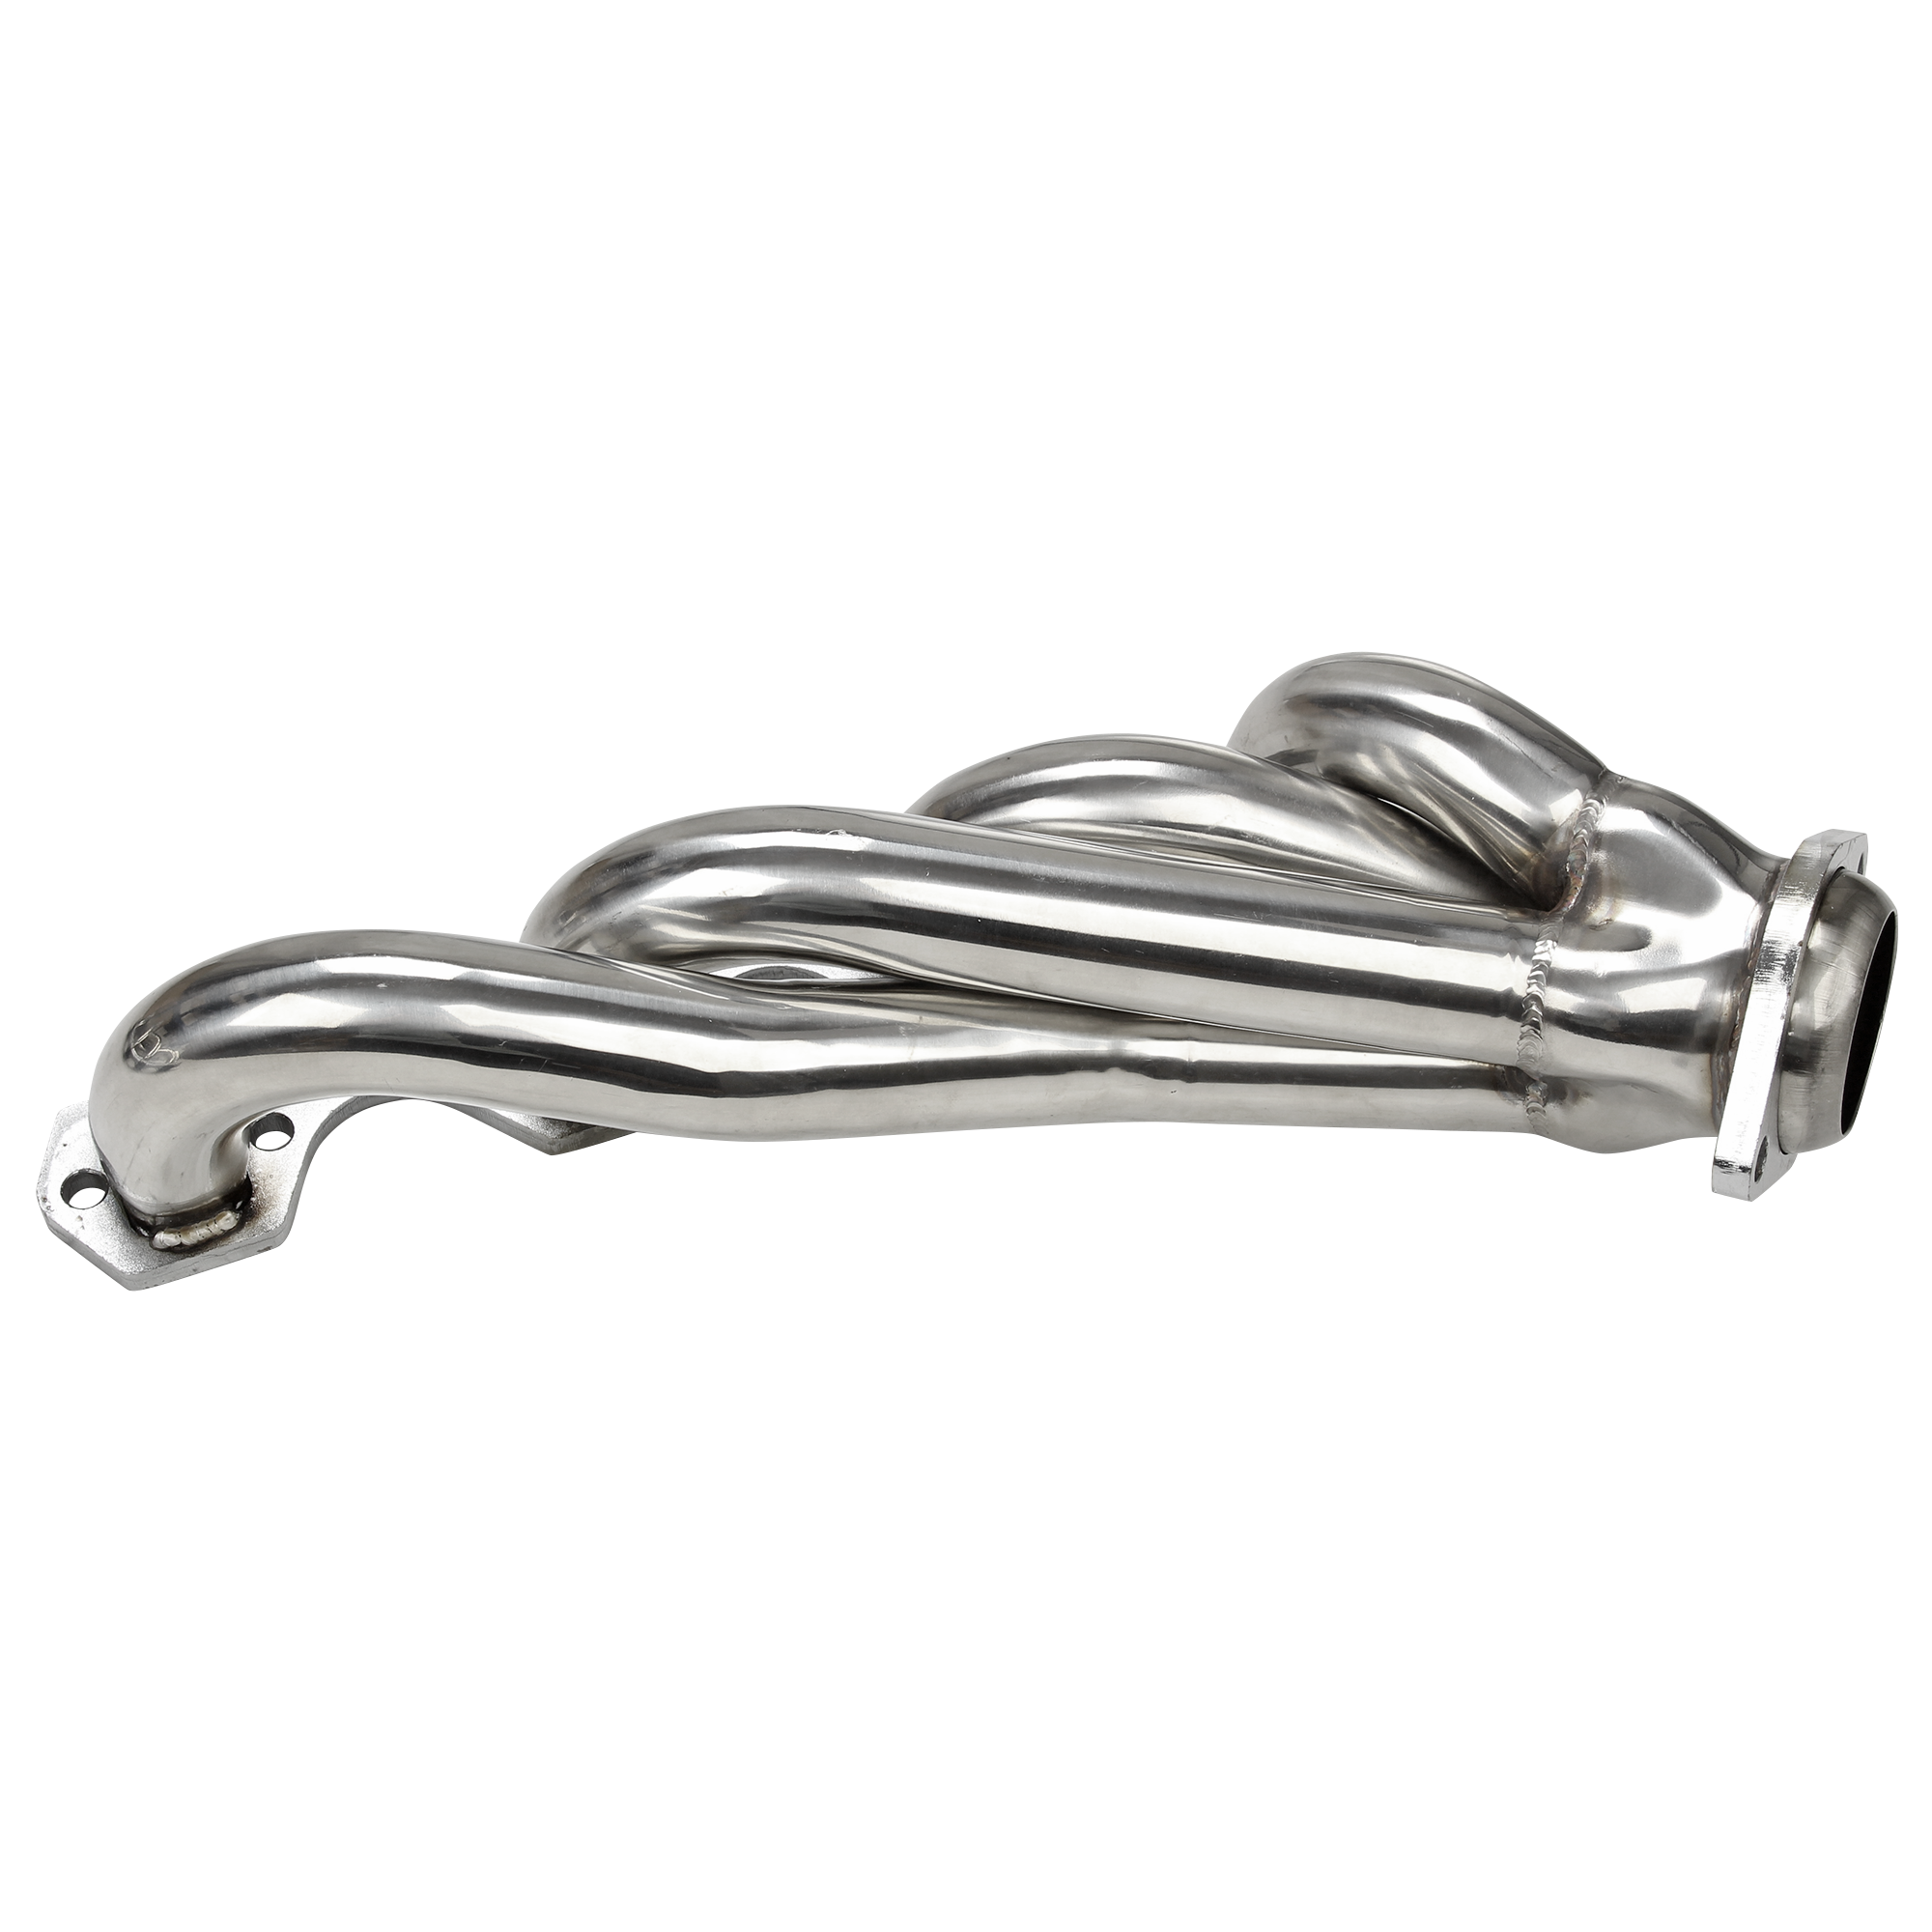 Mustang Exhaust Header for Ford Mustang 86-95 5.0L V8 